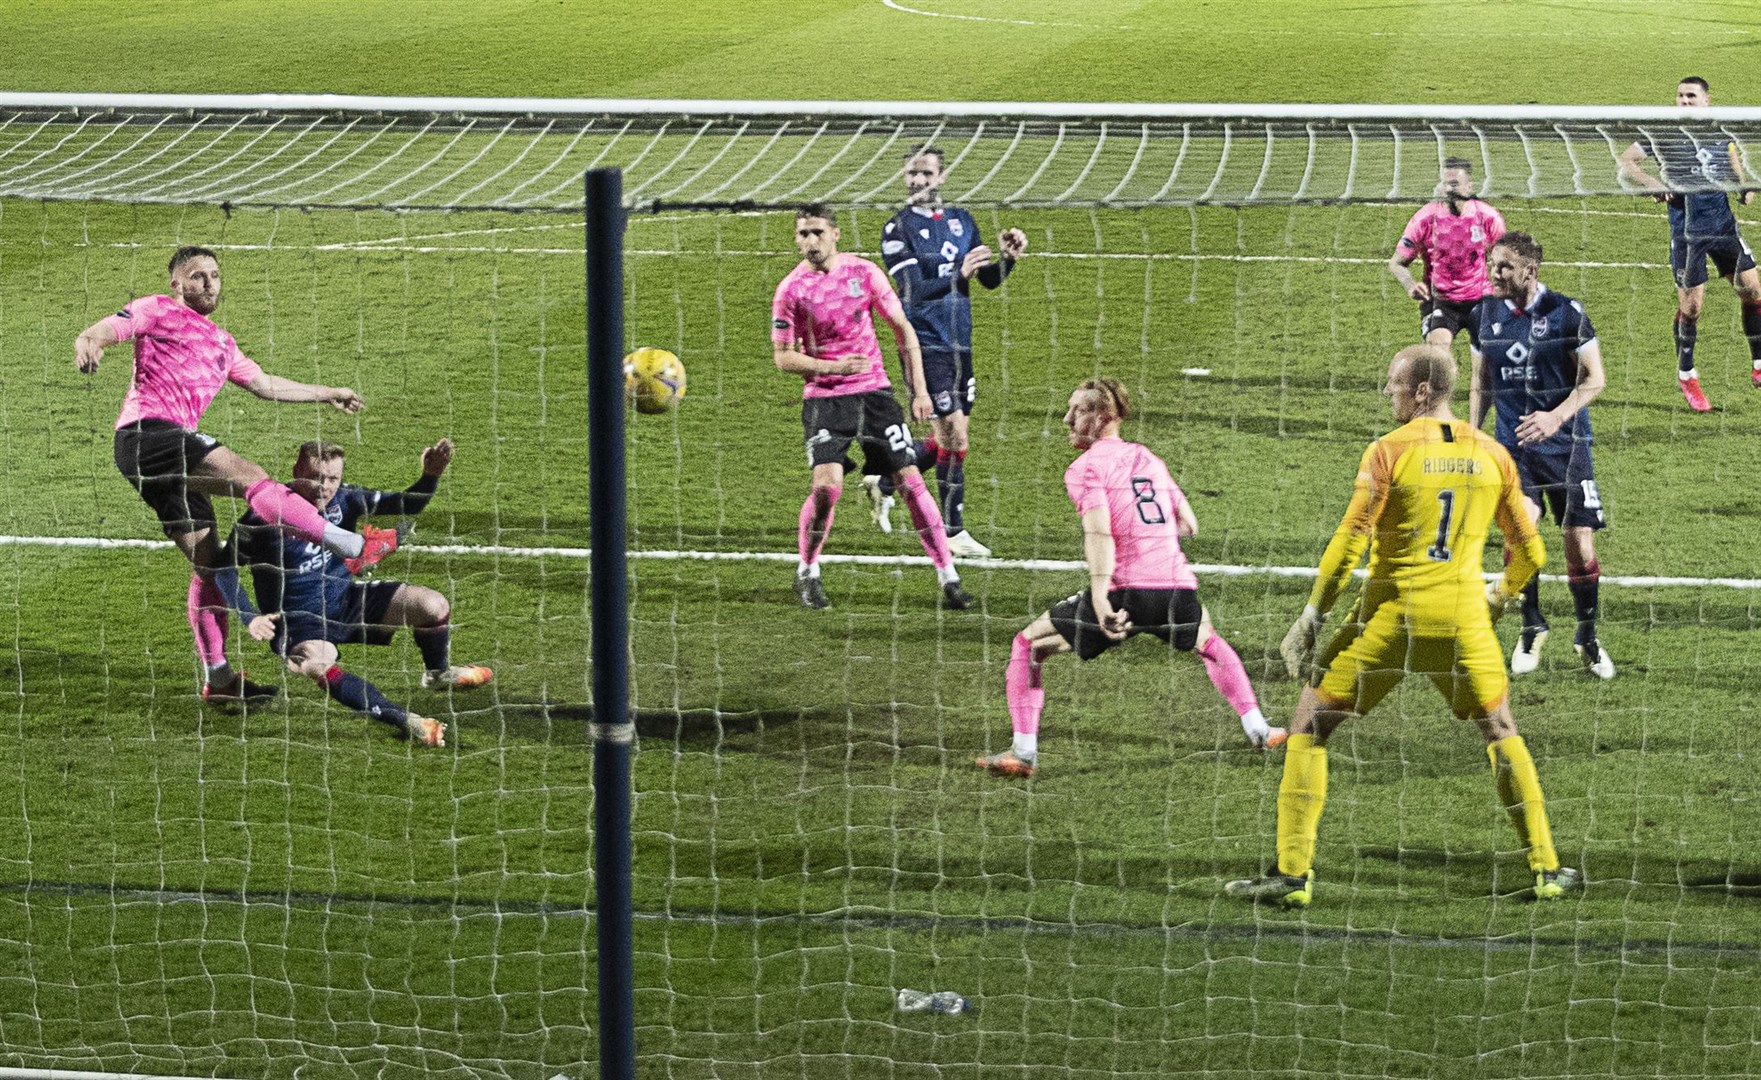 Picture - Ken Macpherson, Inverness. Scottish Cup 3rd Round. Ross County(1) v Inverness CT(3). 02.04.21. Ross County's Billy McKay heads 1st goal past ICT 'keeper Mark Ridgers.